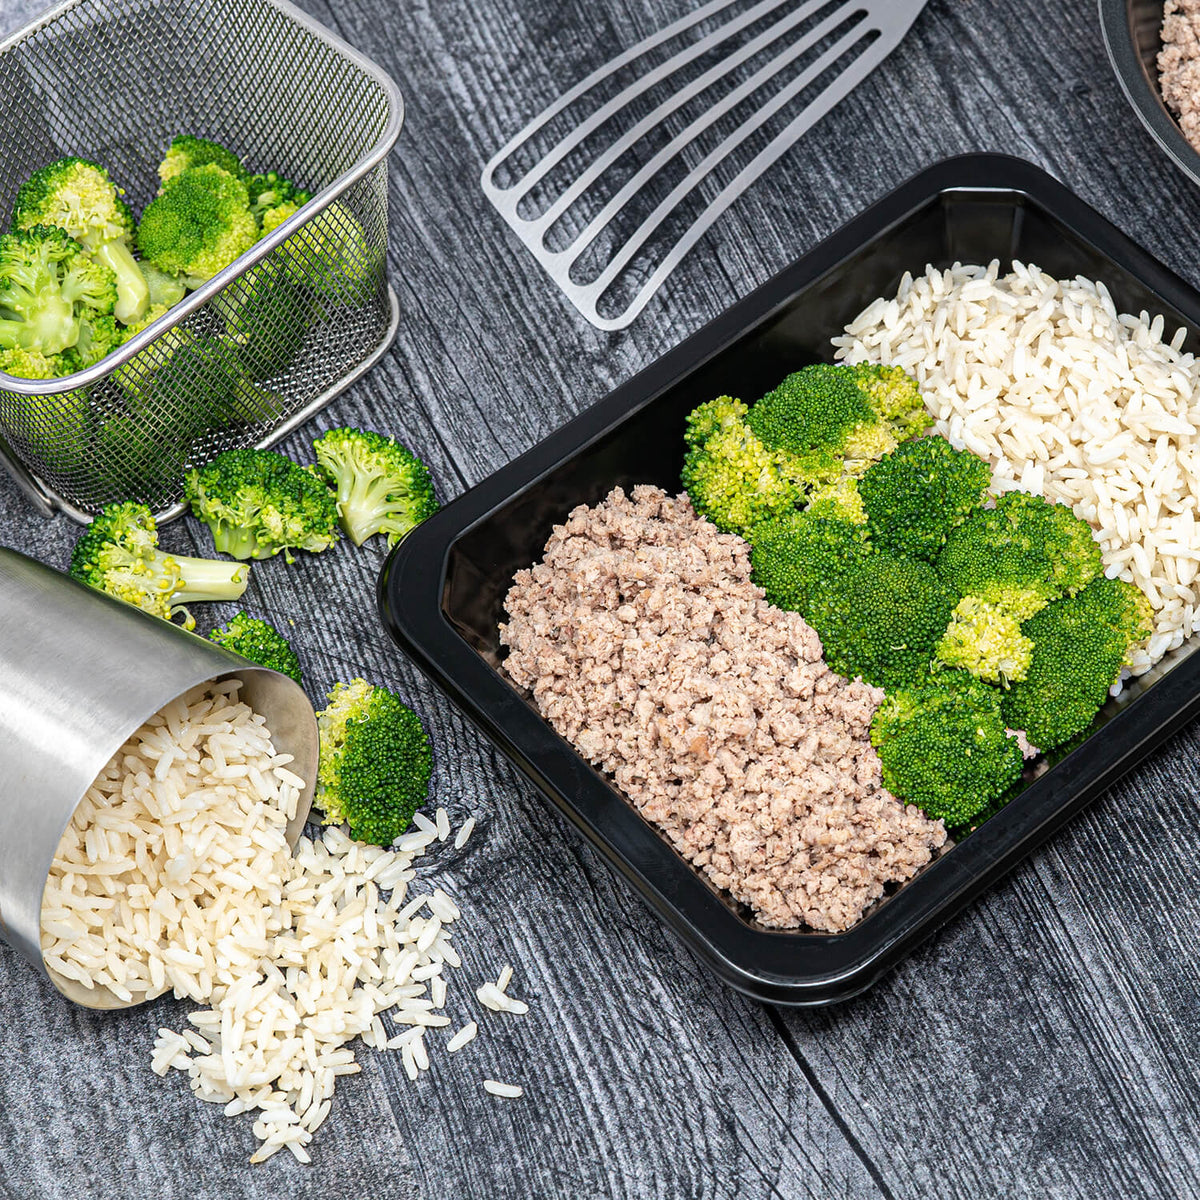 These Enther Meal Prep Containers Are On Sale for $10 on